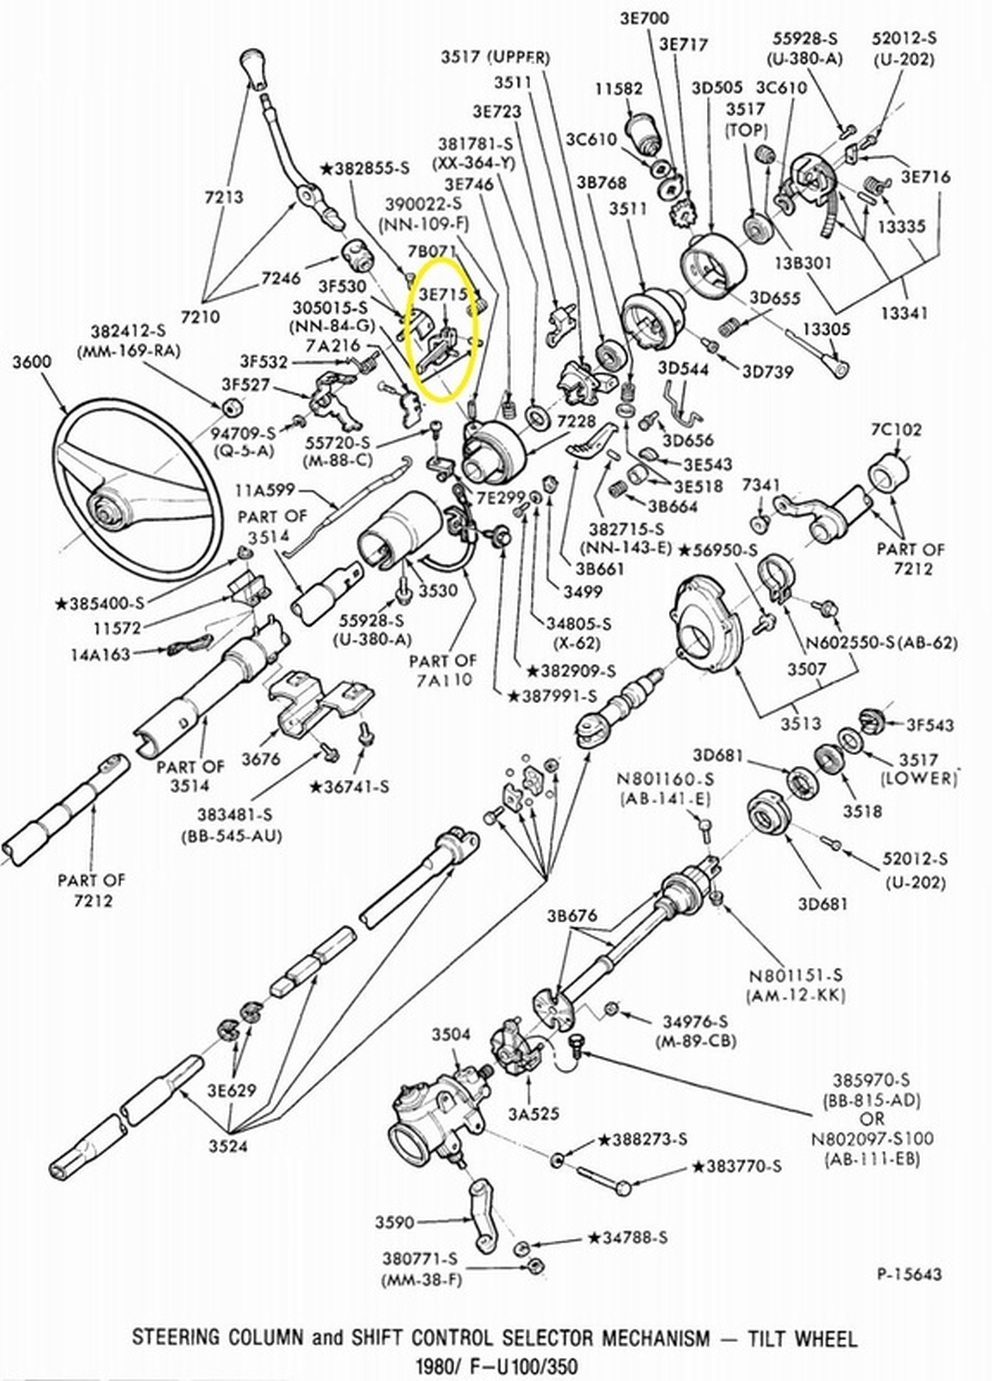 26+ Ford Steering Column Parts Diagram